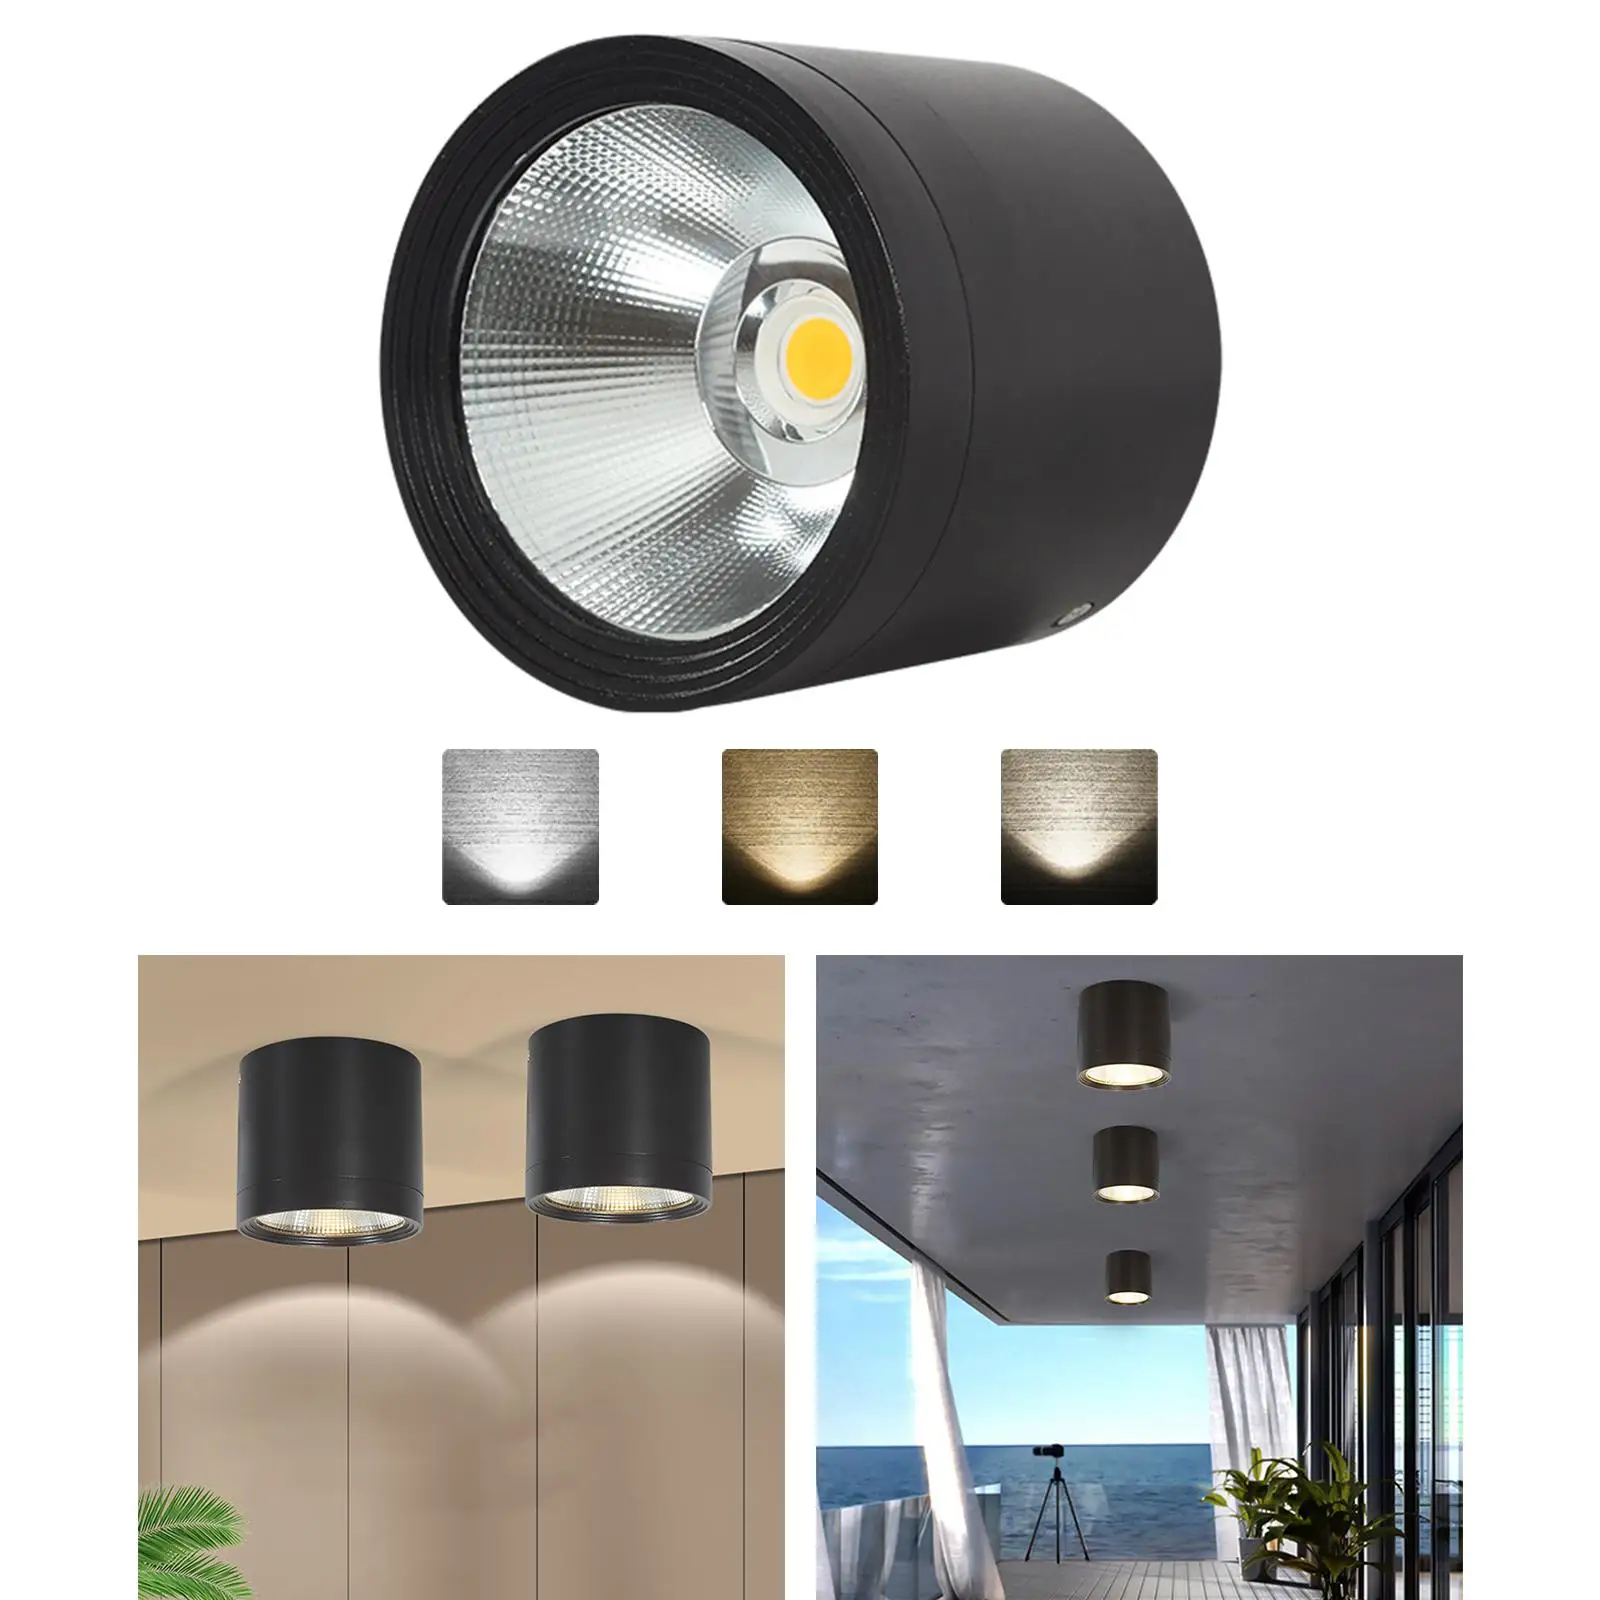 Waterproof Ceiling Down Light Nordic Anti Glare Indoor Surface Mounted Spotlights Lamp for Kitchen Bathroom Hallway Dining Room